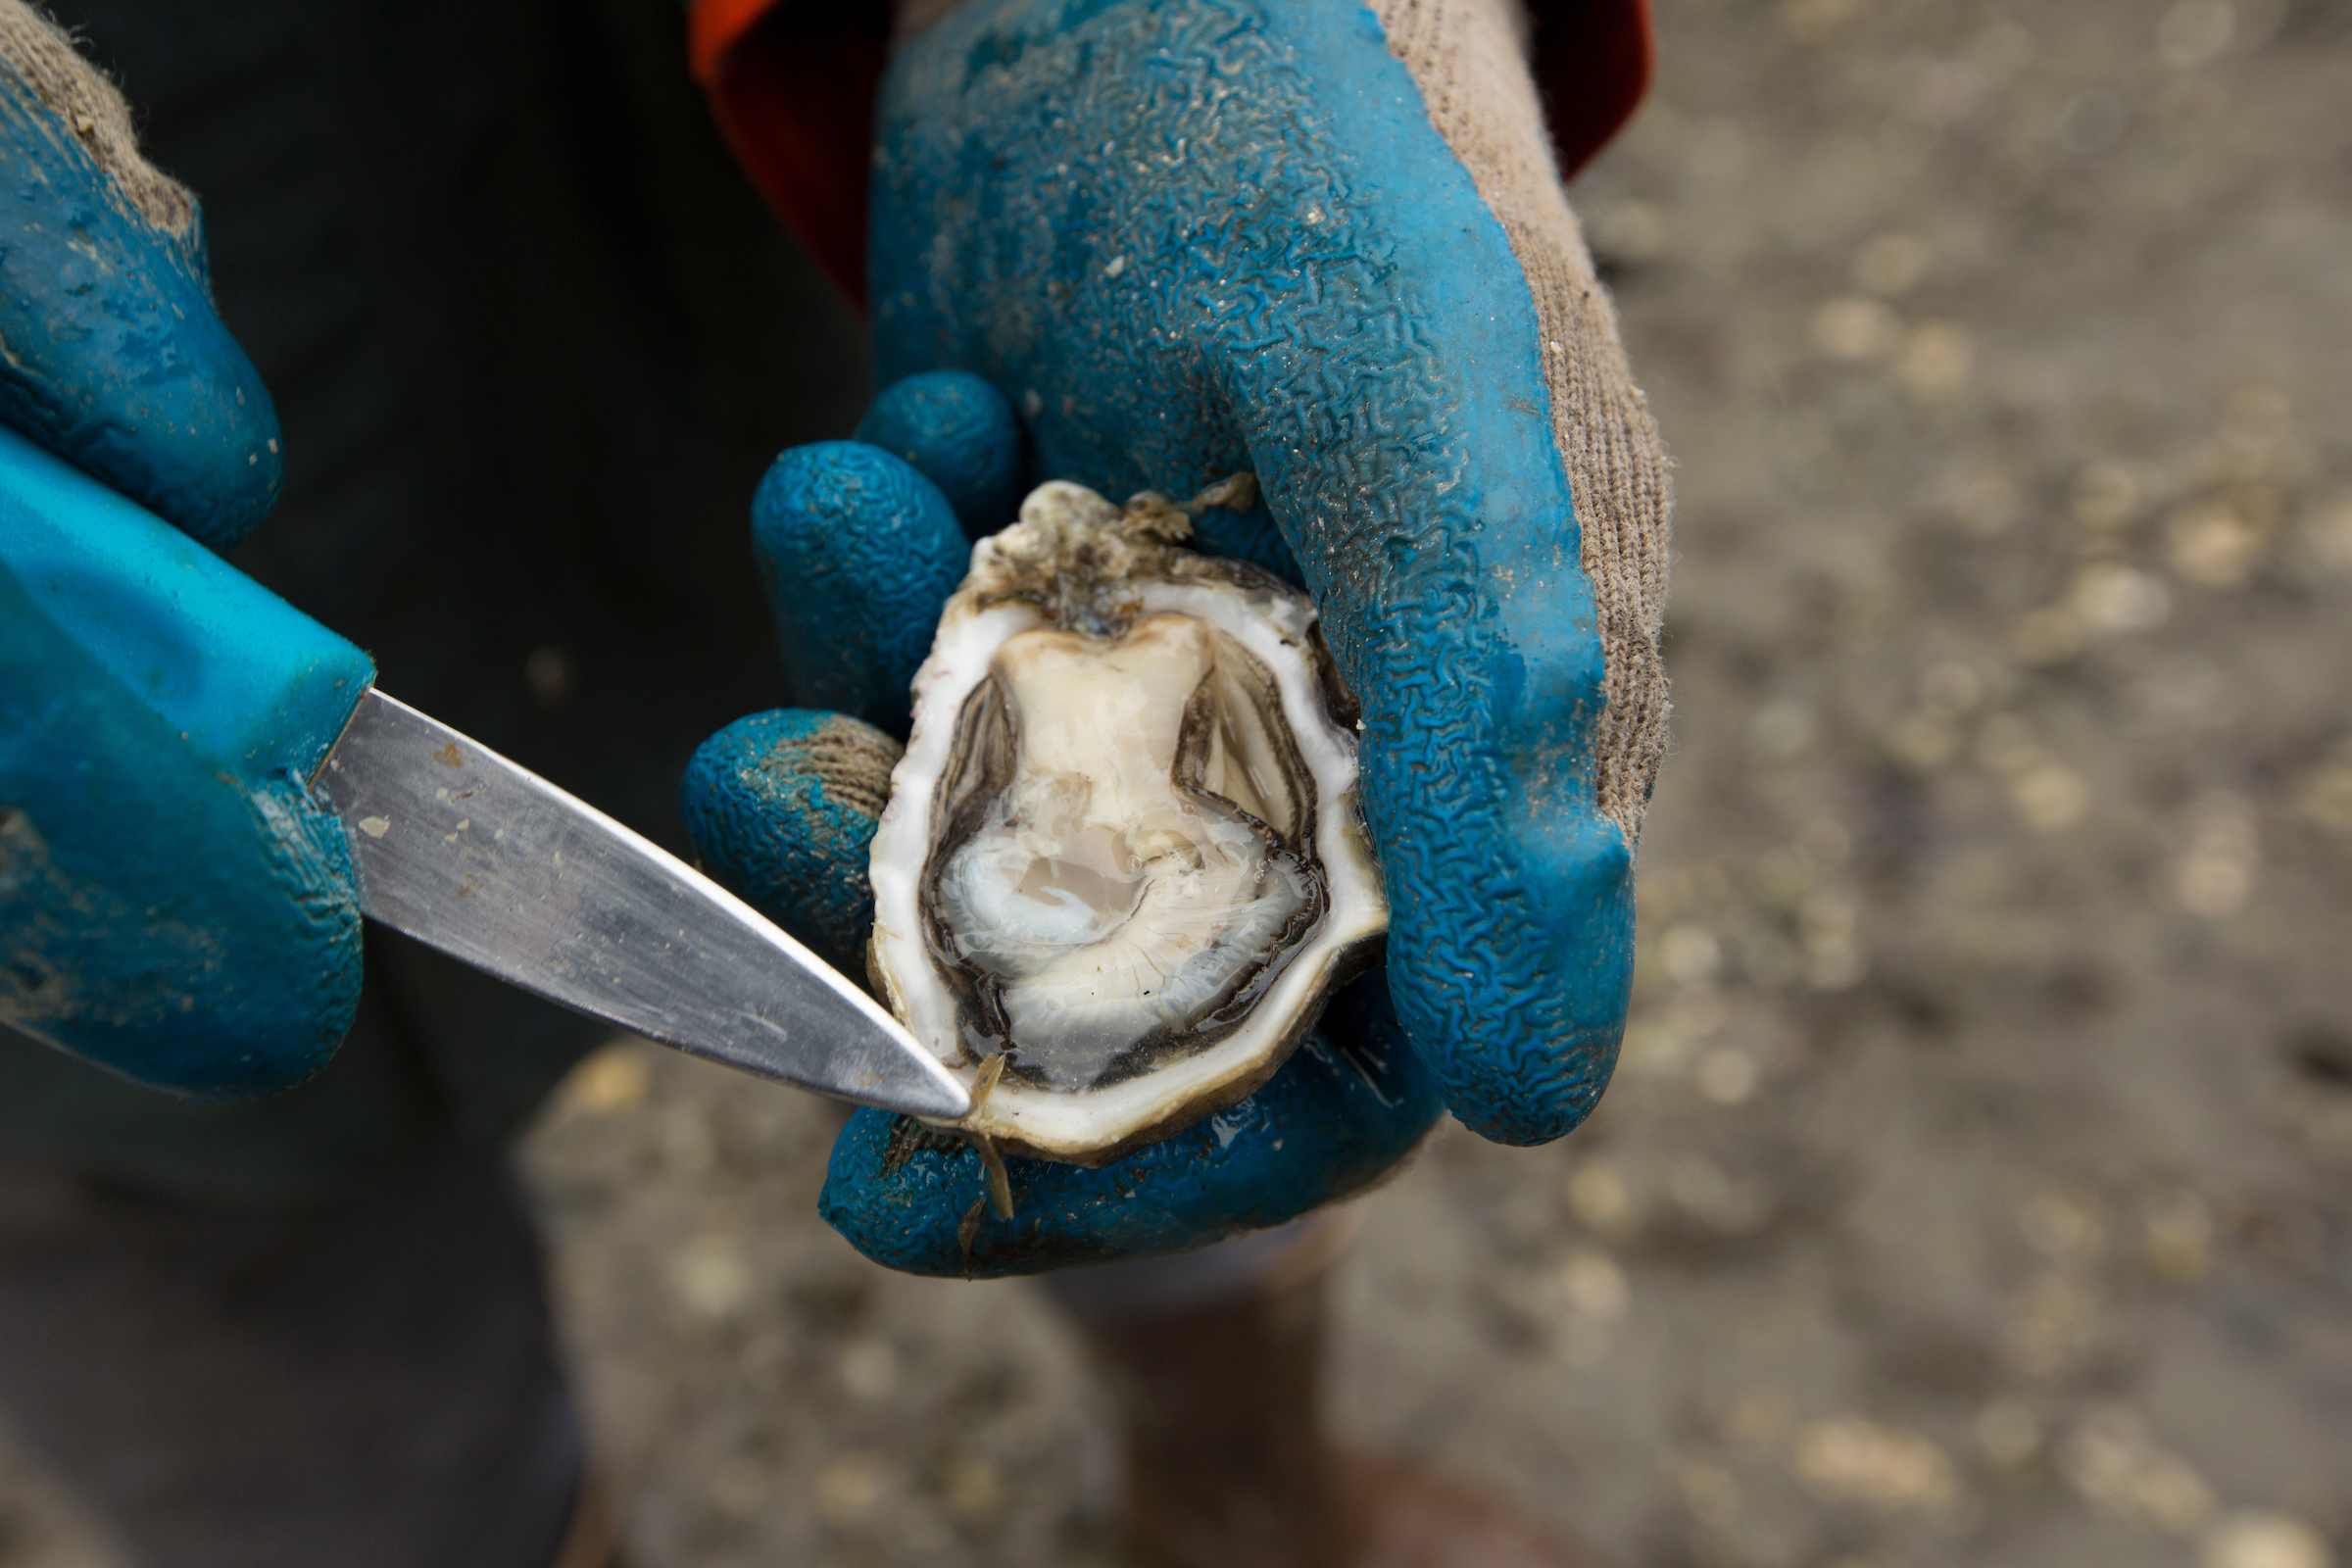 A person wearing blue rubber gloves holding a shucked raw oyster and a blue shucking knife.